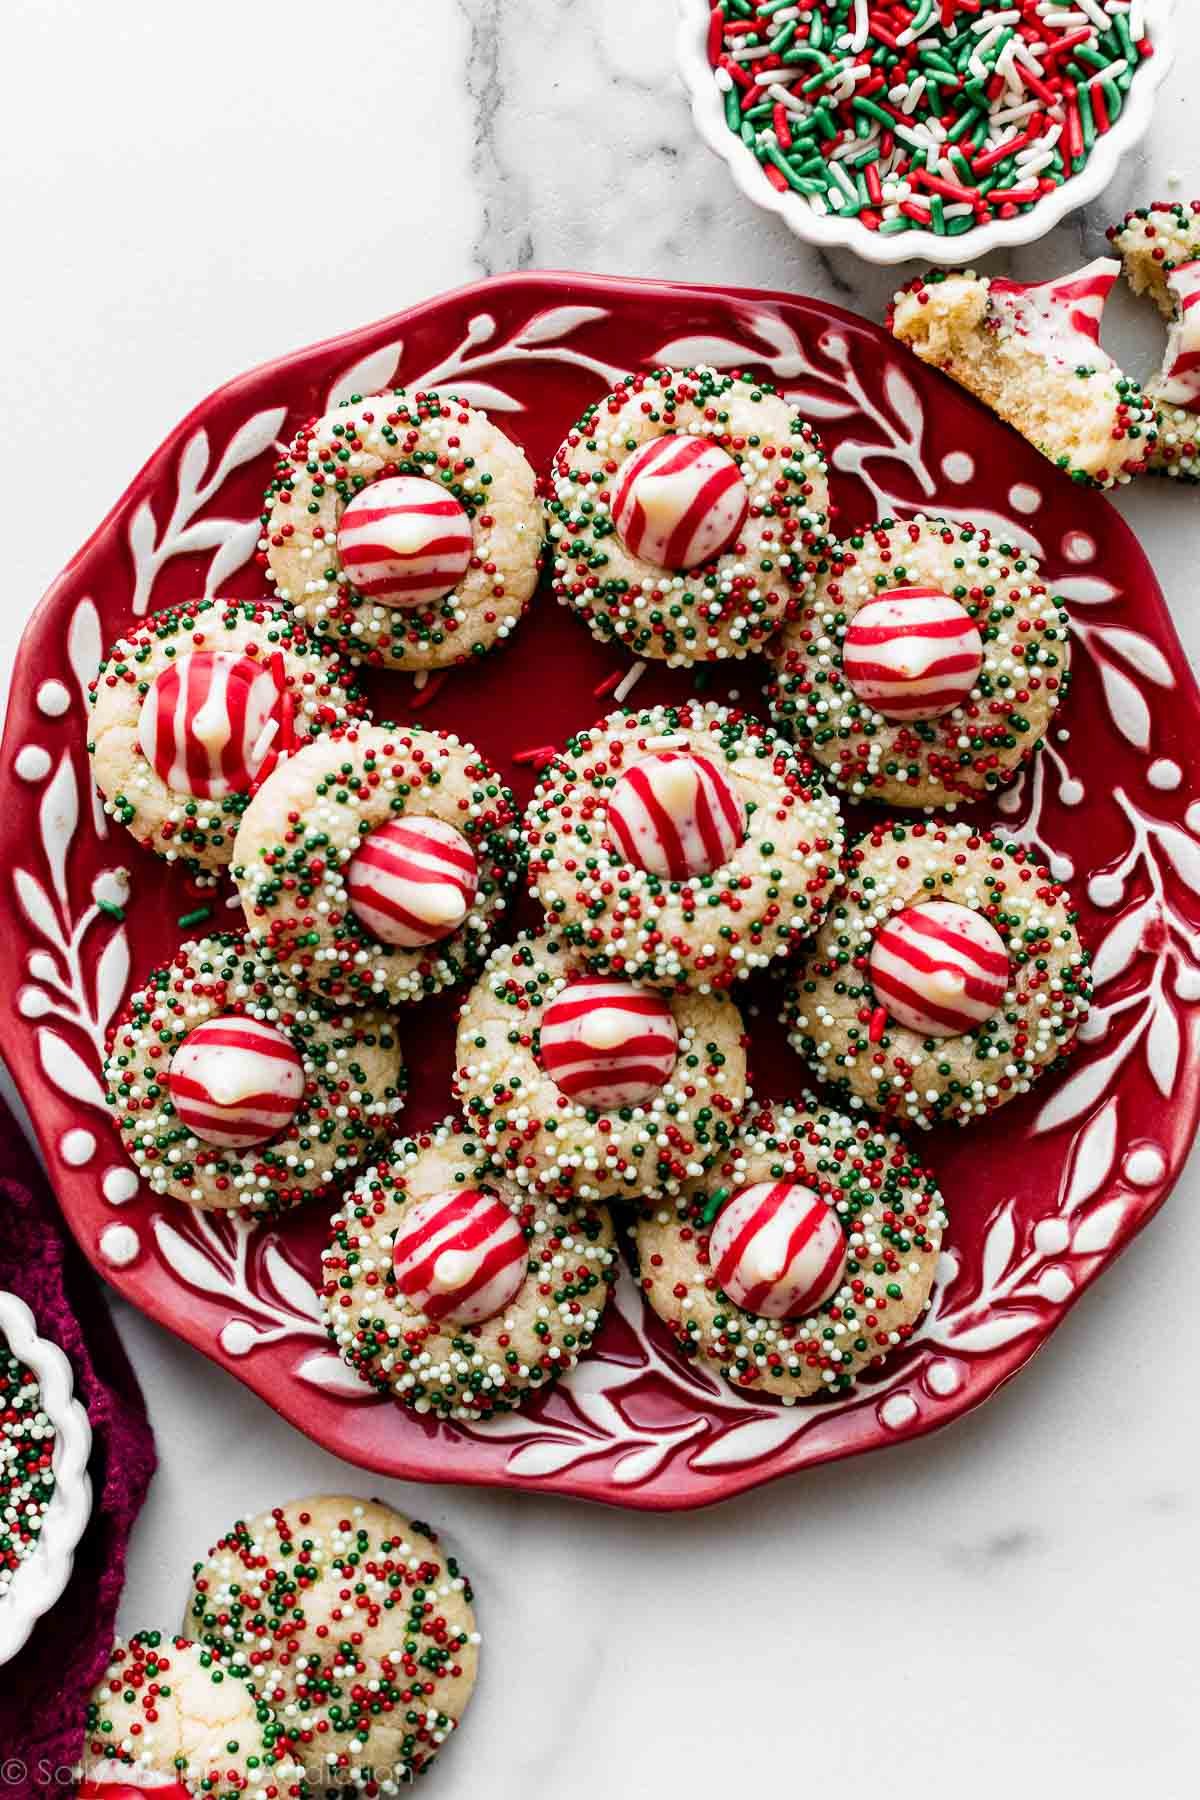 11 sugar cookies rolled in Christmas nonpareil sprinkles with candy cane Hershey's Kiss pressed into center arranged on red plate.